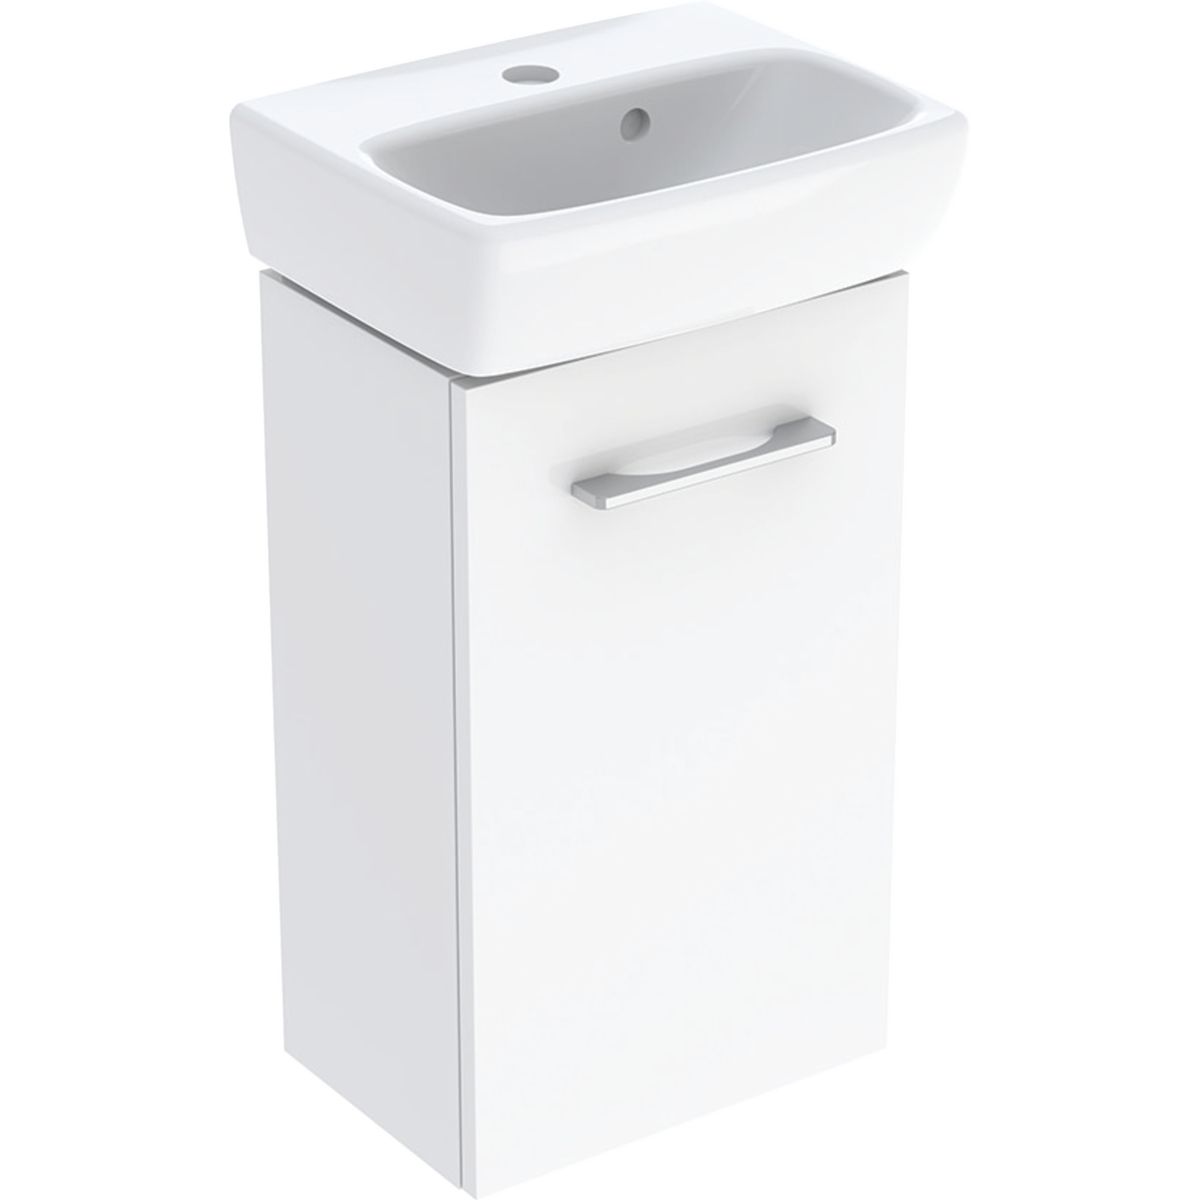 Selnova Square basins with cabinet, one door 360mm - White